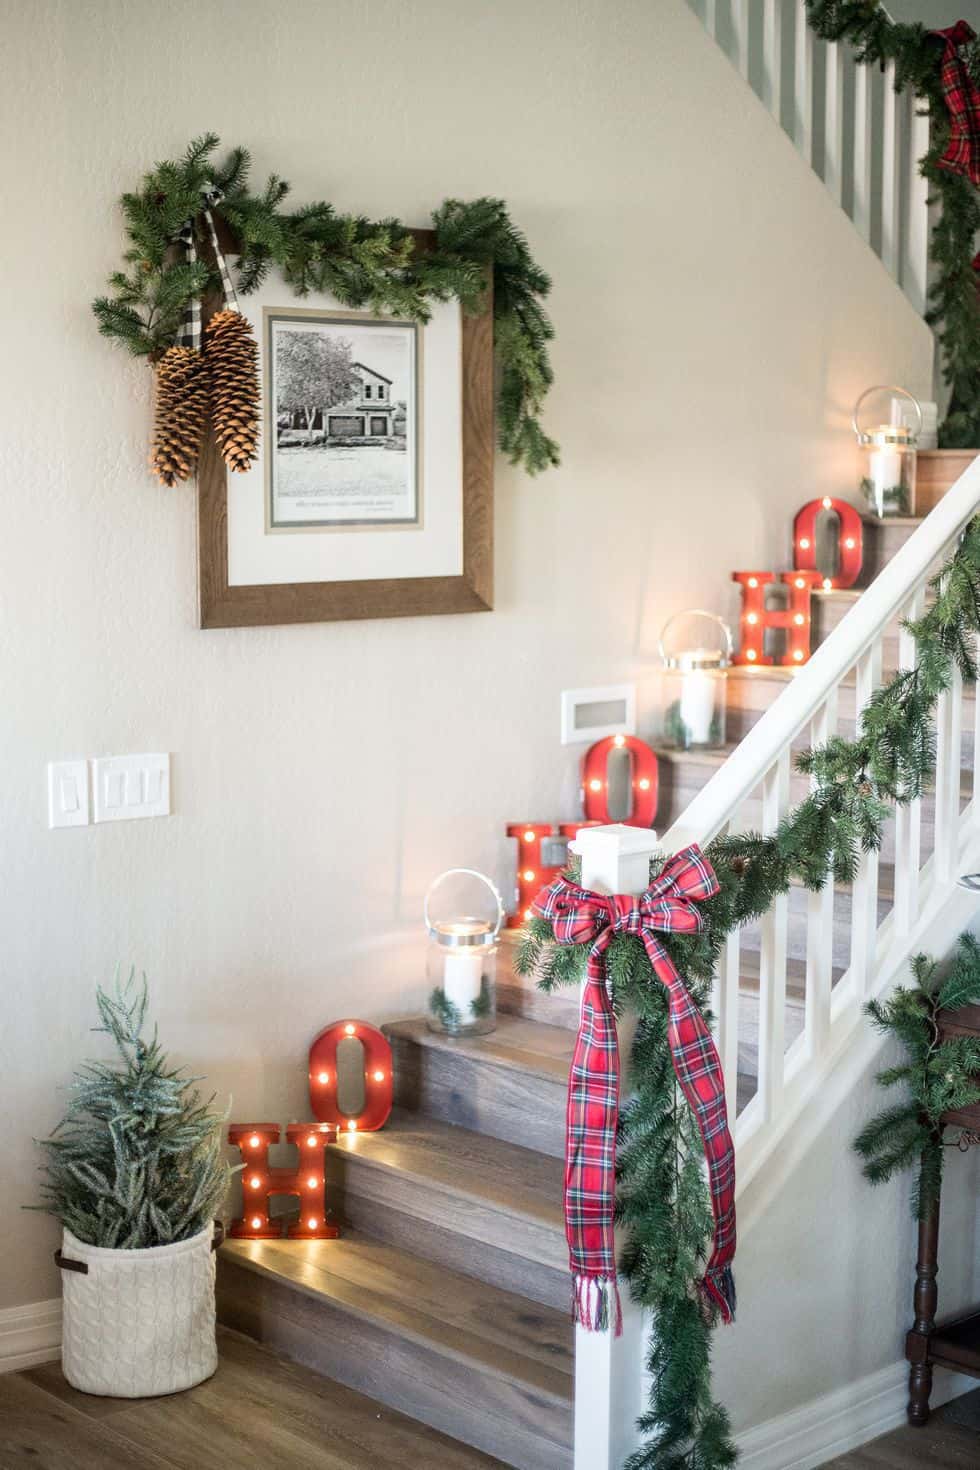 DIY Festive Christmas Wall Decor Ideas that will Instantly Get You into